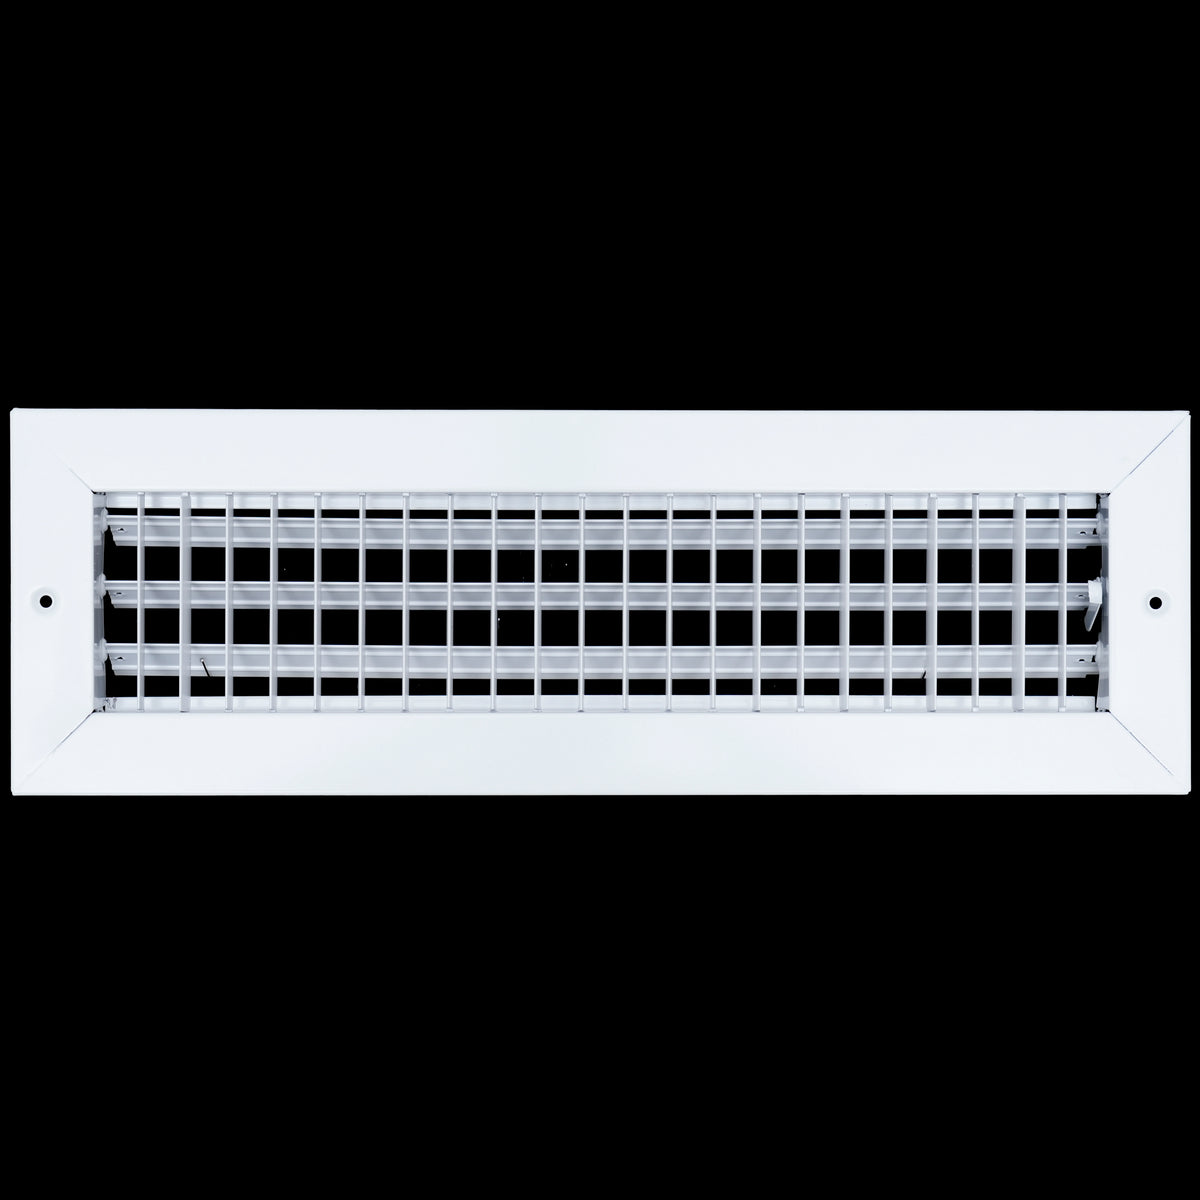 airgrilles 16"w x 4"h steel adjustable air supply grille   register vent cover grill for sidewall and ceiling   white   outer dimensions: 17.75"w x 5.75"h for 16x4 duct opening hnd-adj-wh-16x4  - 1